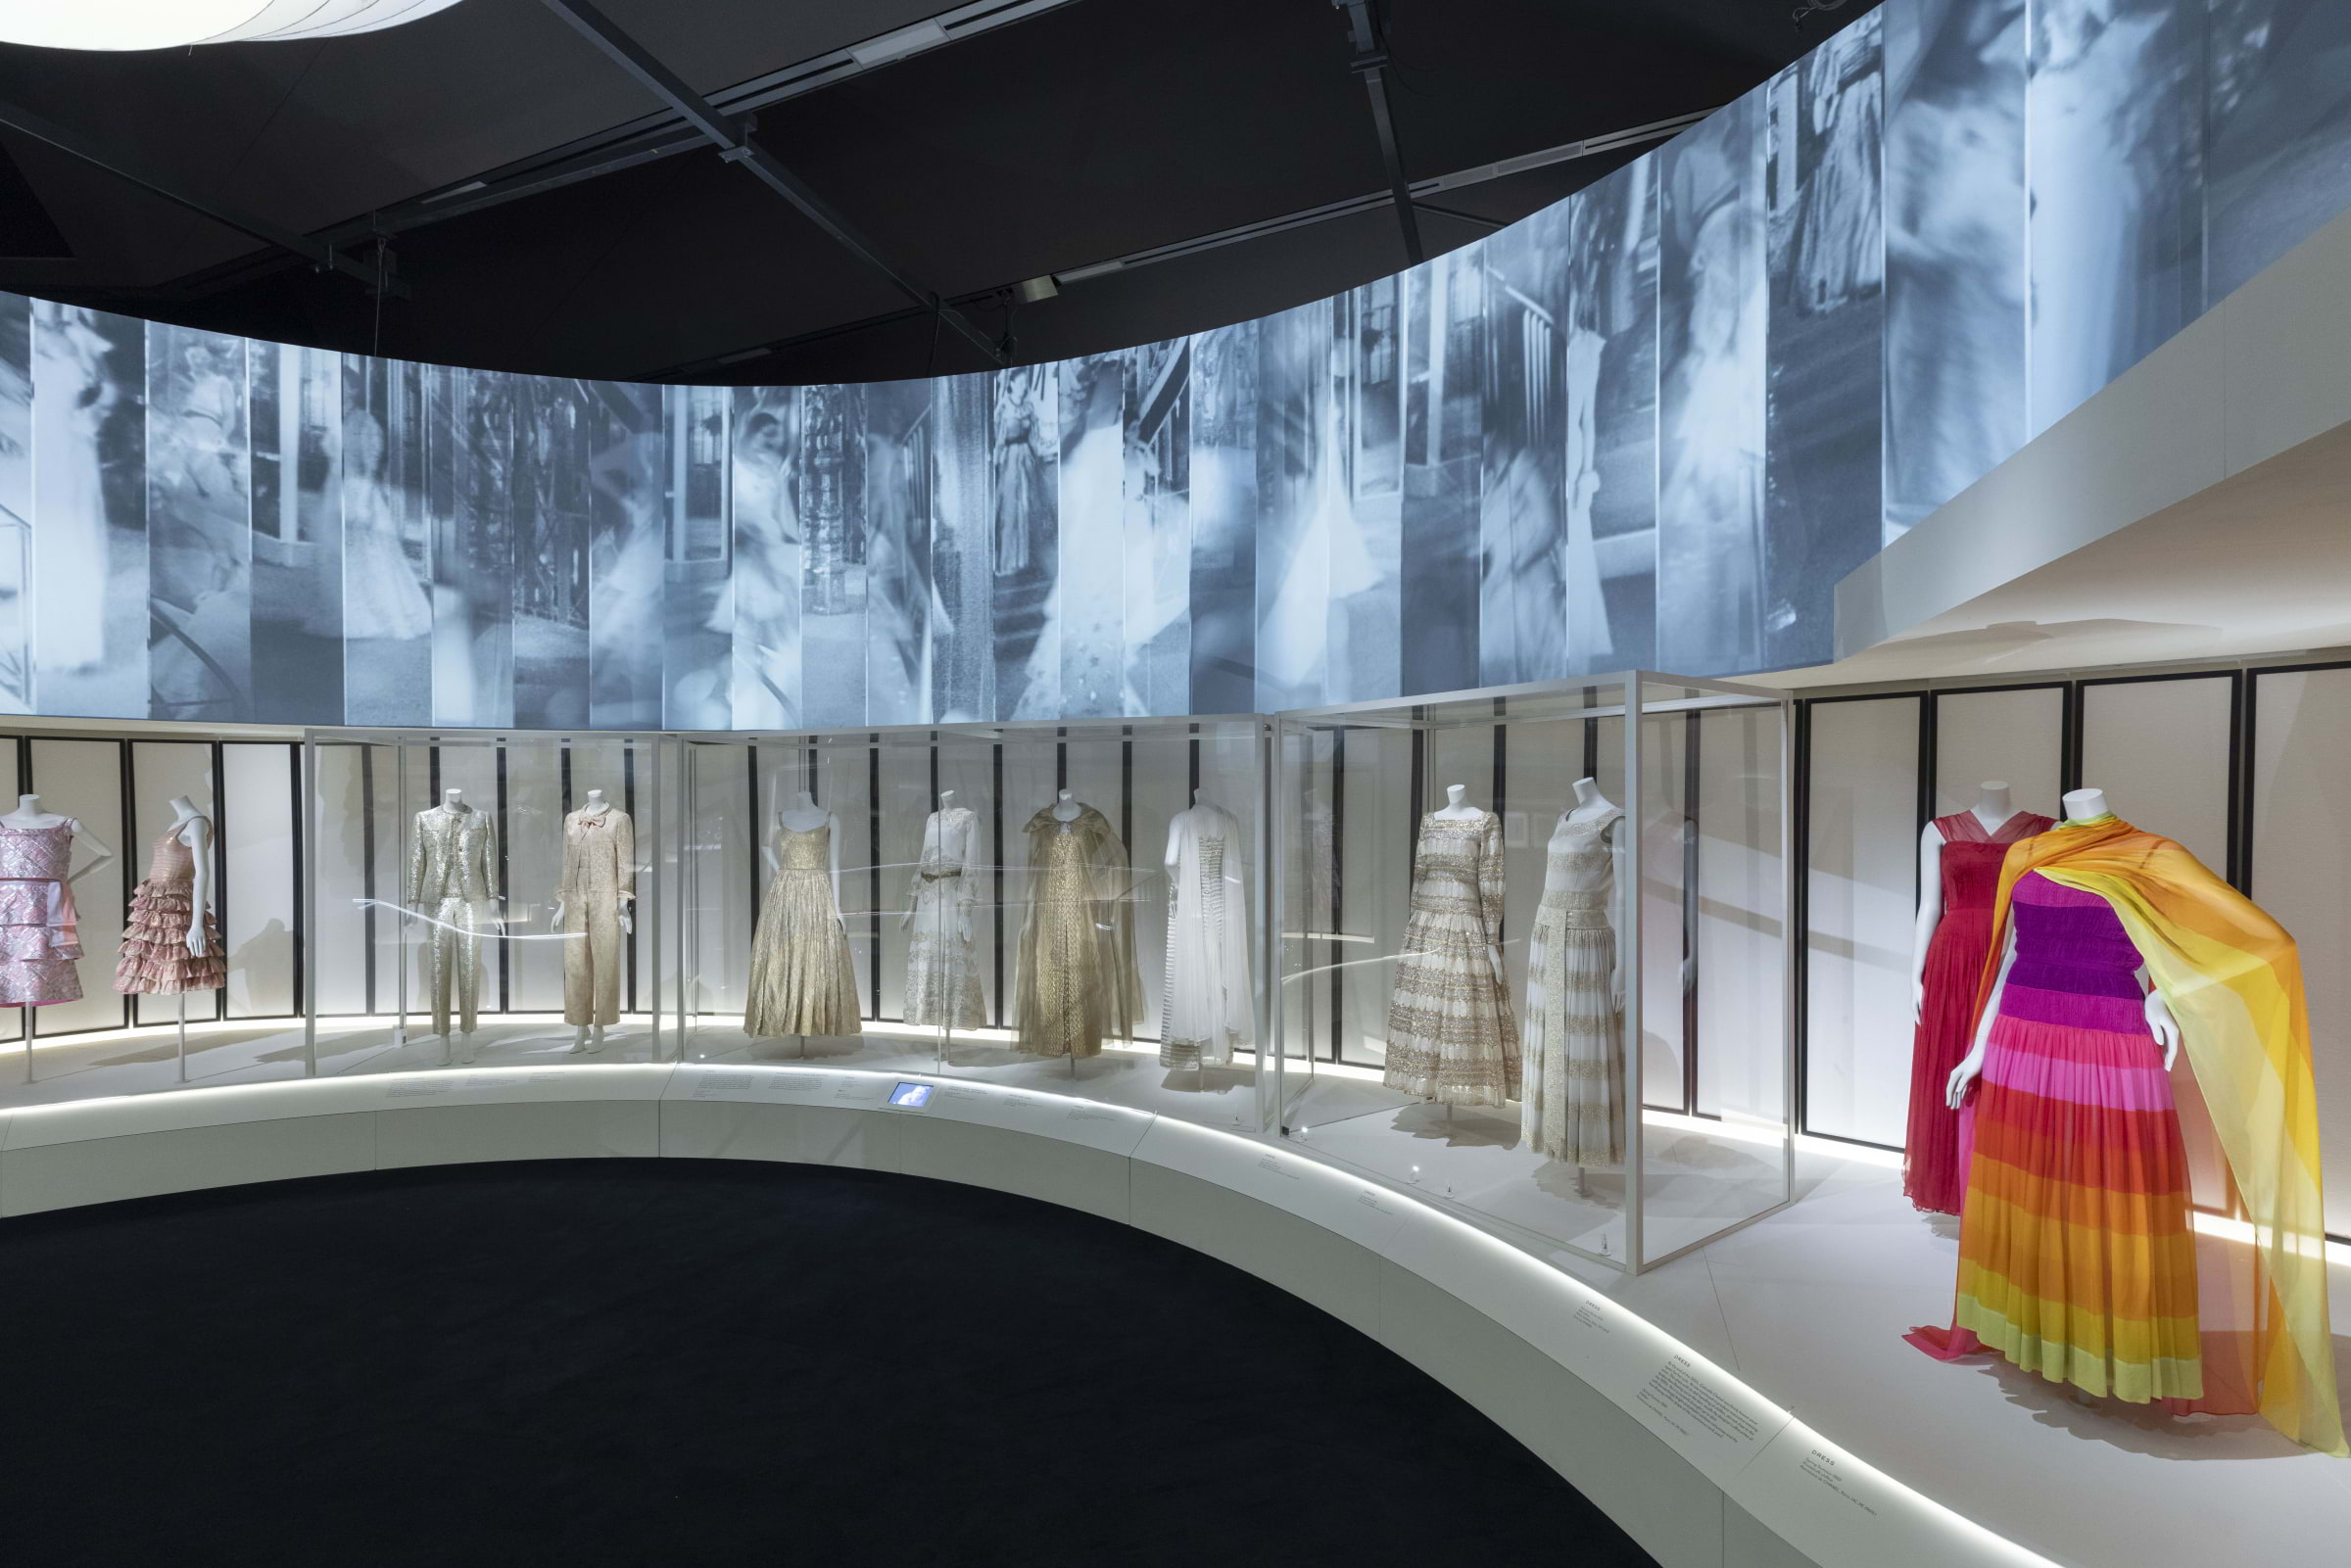 This blockbuster V&A exhibition delves into the work of fashion